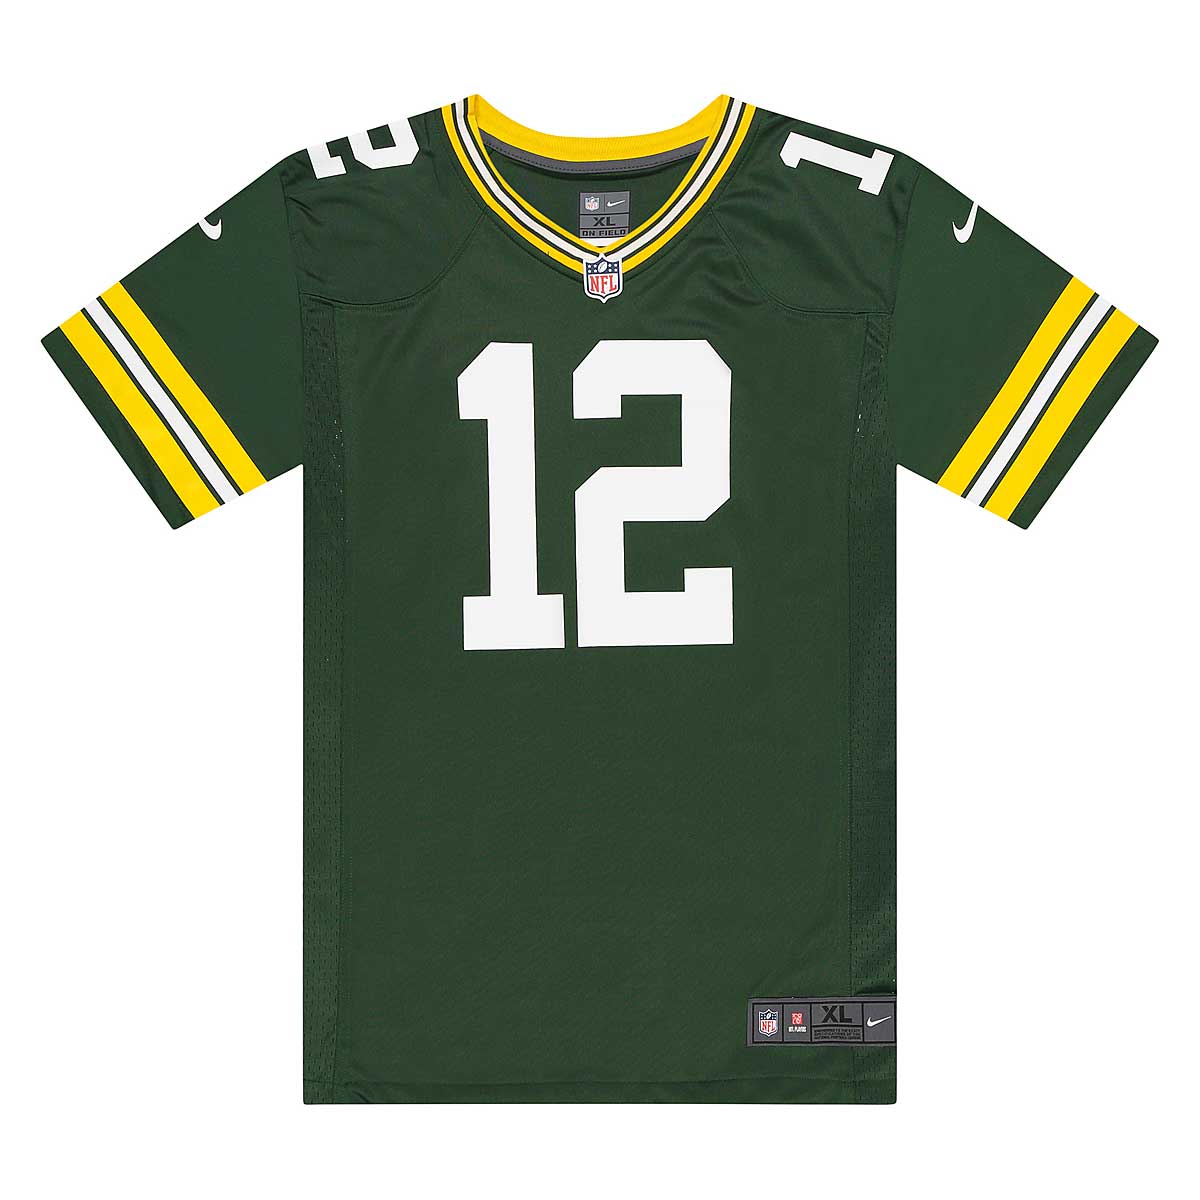 Nike Nfl Green Bay Packers A Rodgers 12 Jersey Home, Fir Green Bay Packers